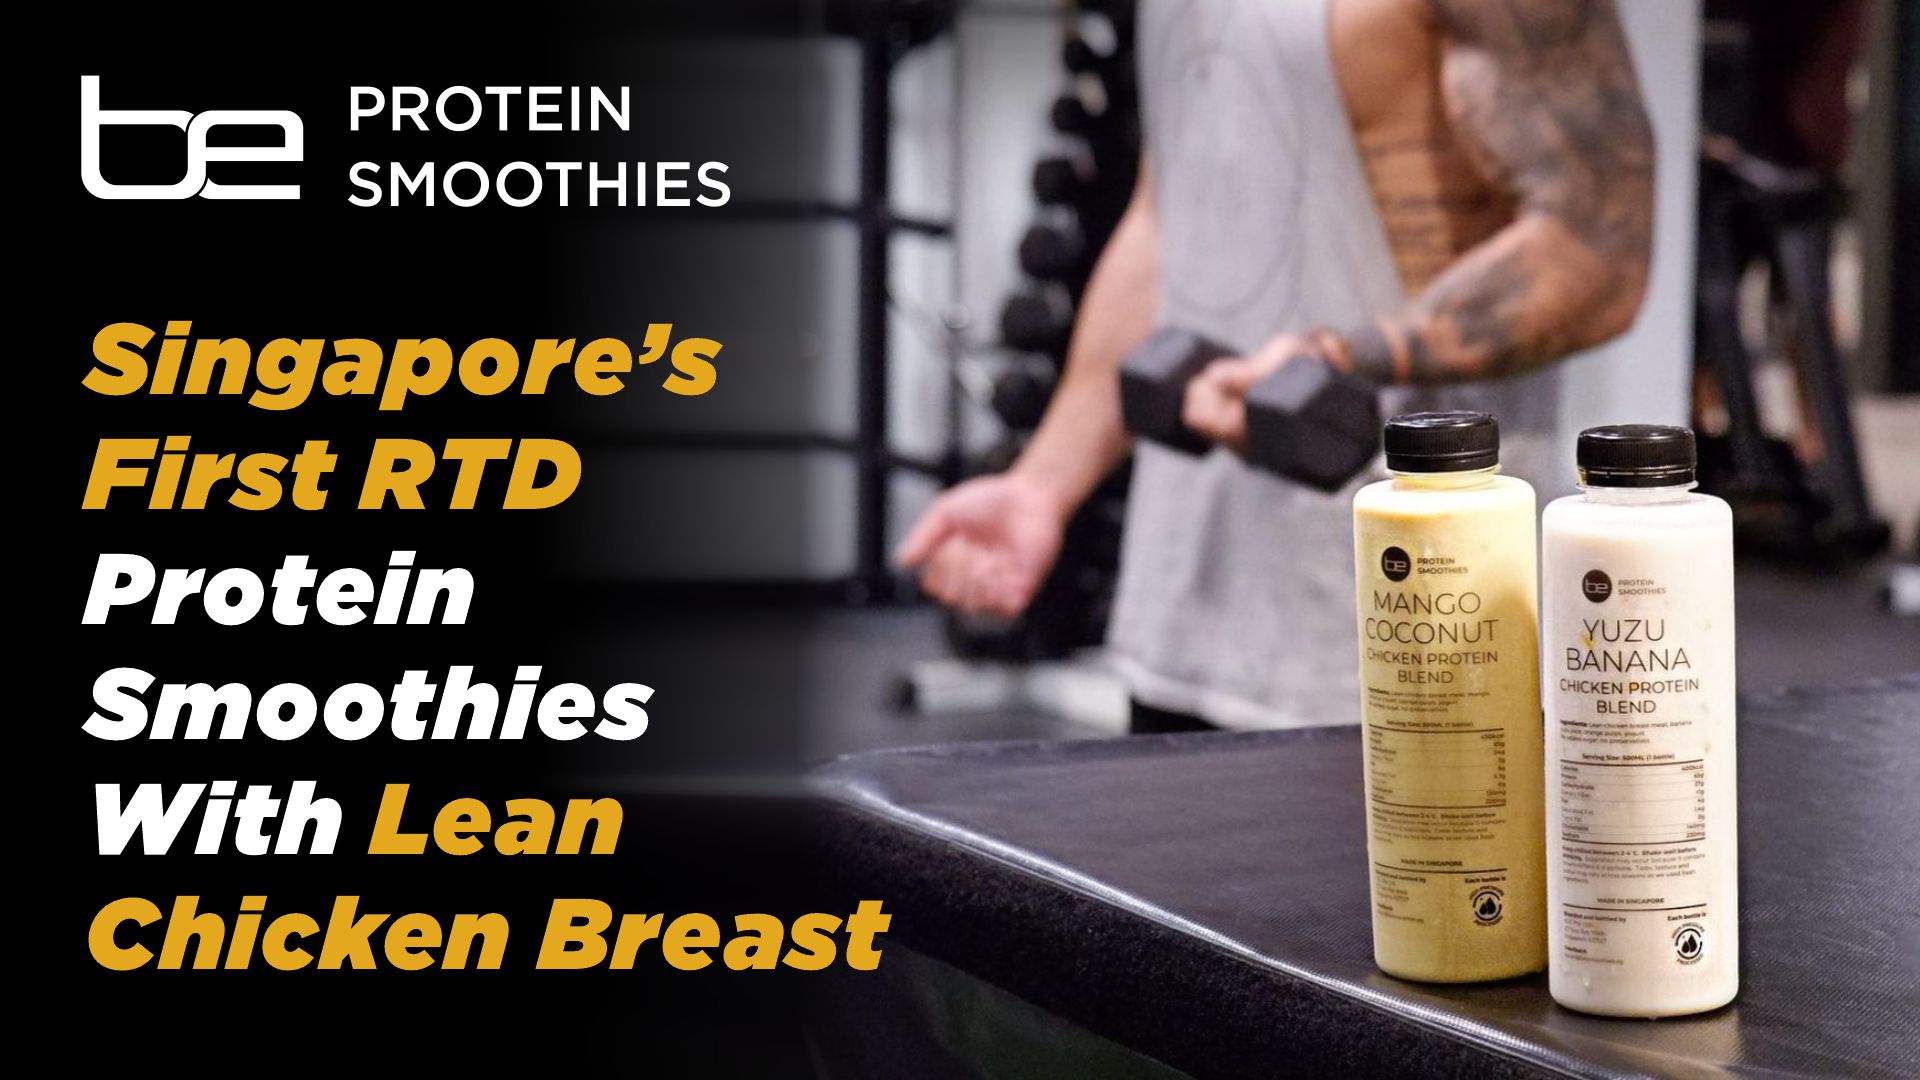 [PROMO] 3 Reasons To Consume More Protein